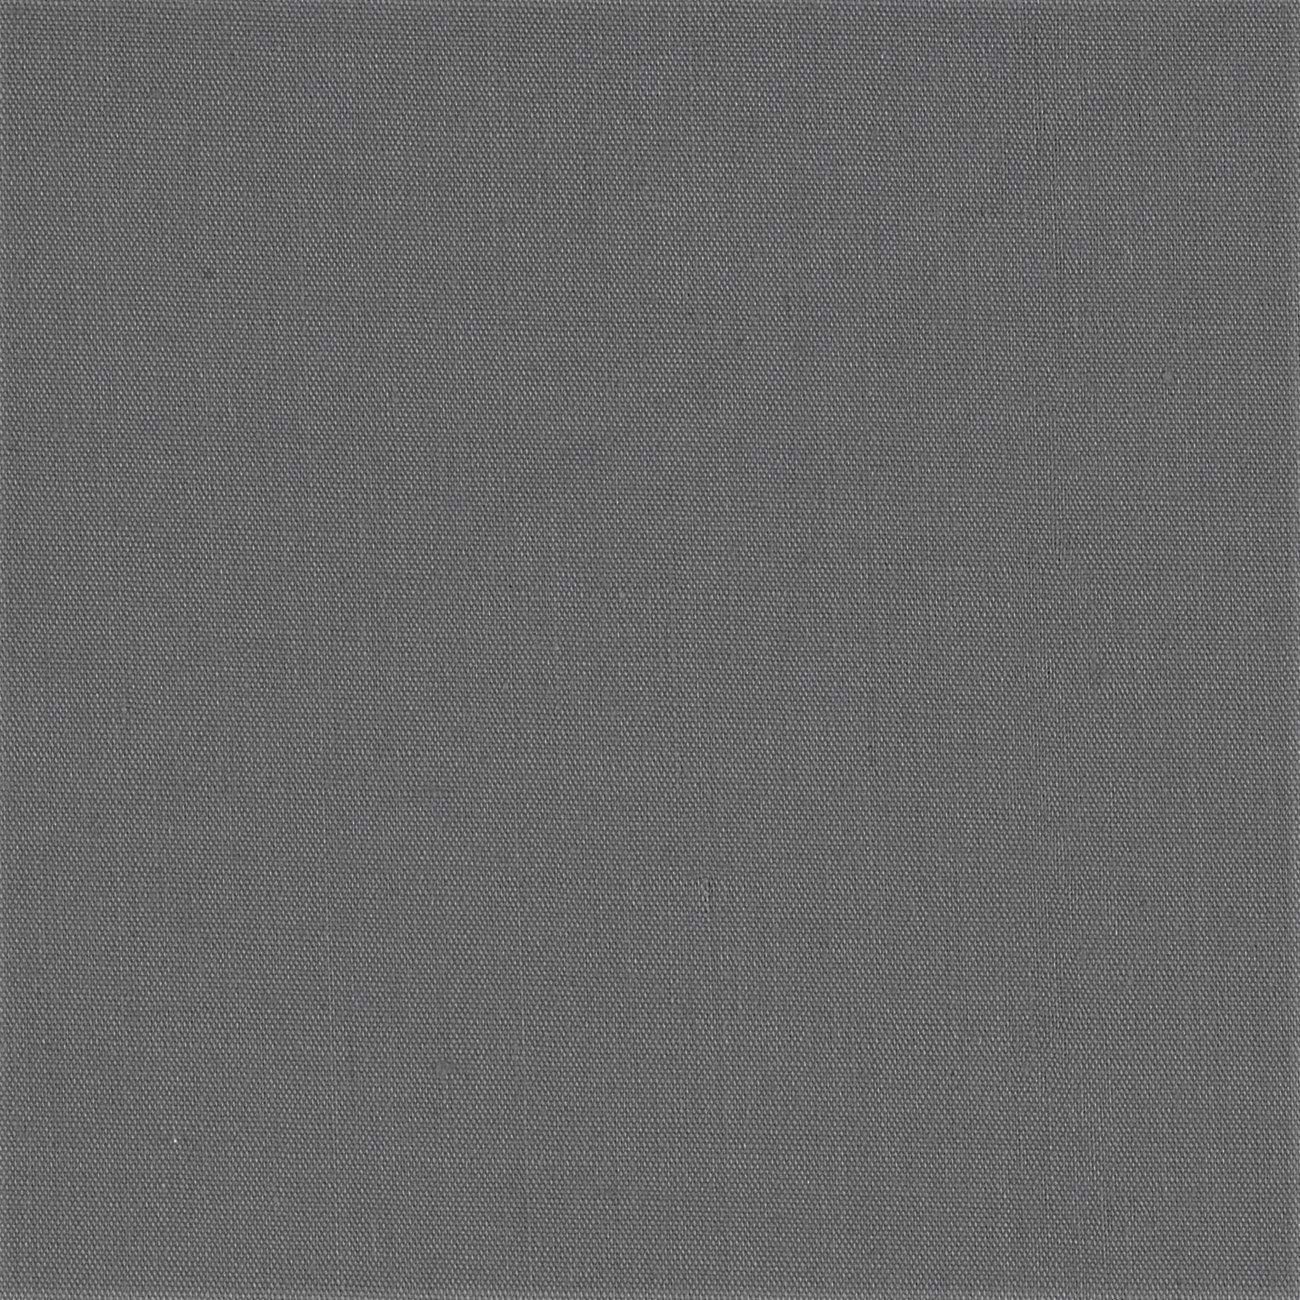 Premium Light Weight Poly Cotton Blend Broadcloth Fabric, Good to Make Face Mask Fabric (Grey, 1 Yard)